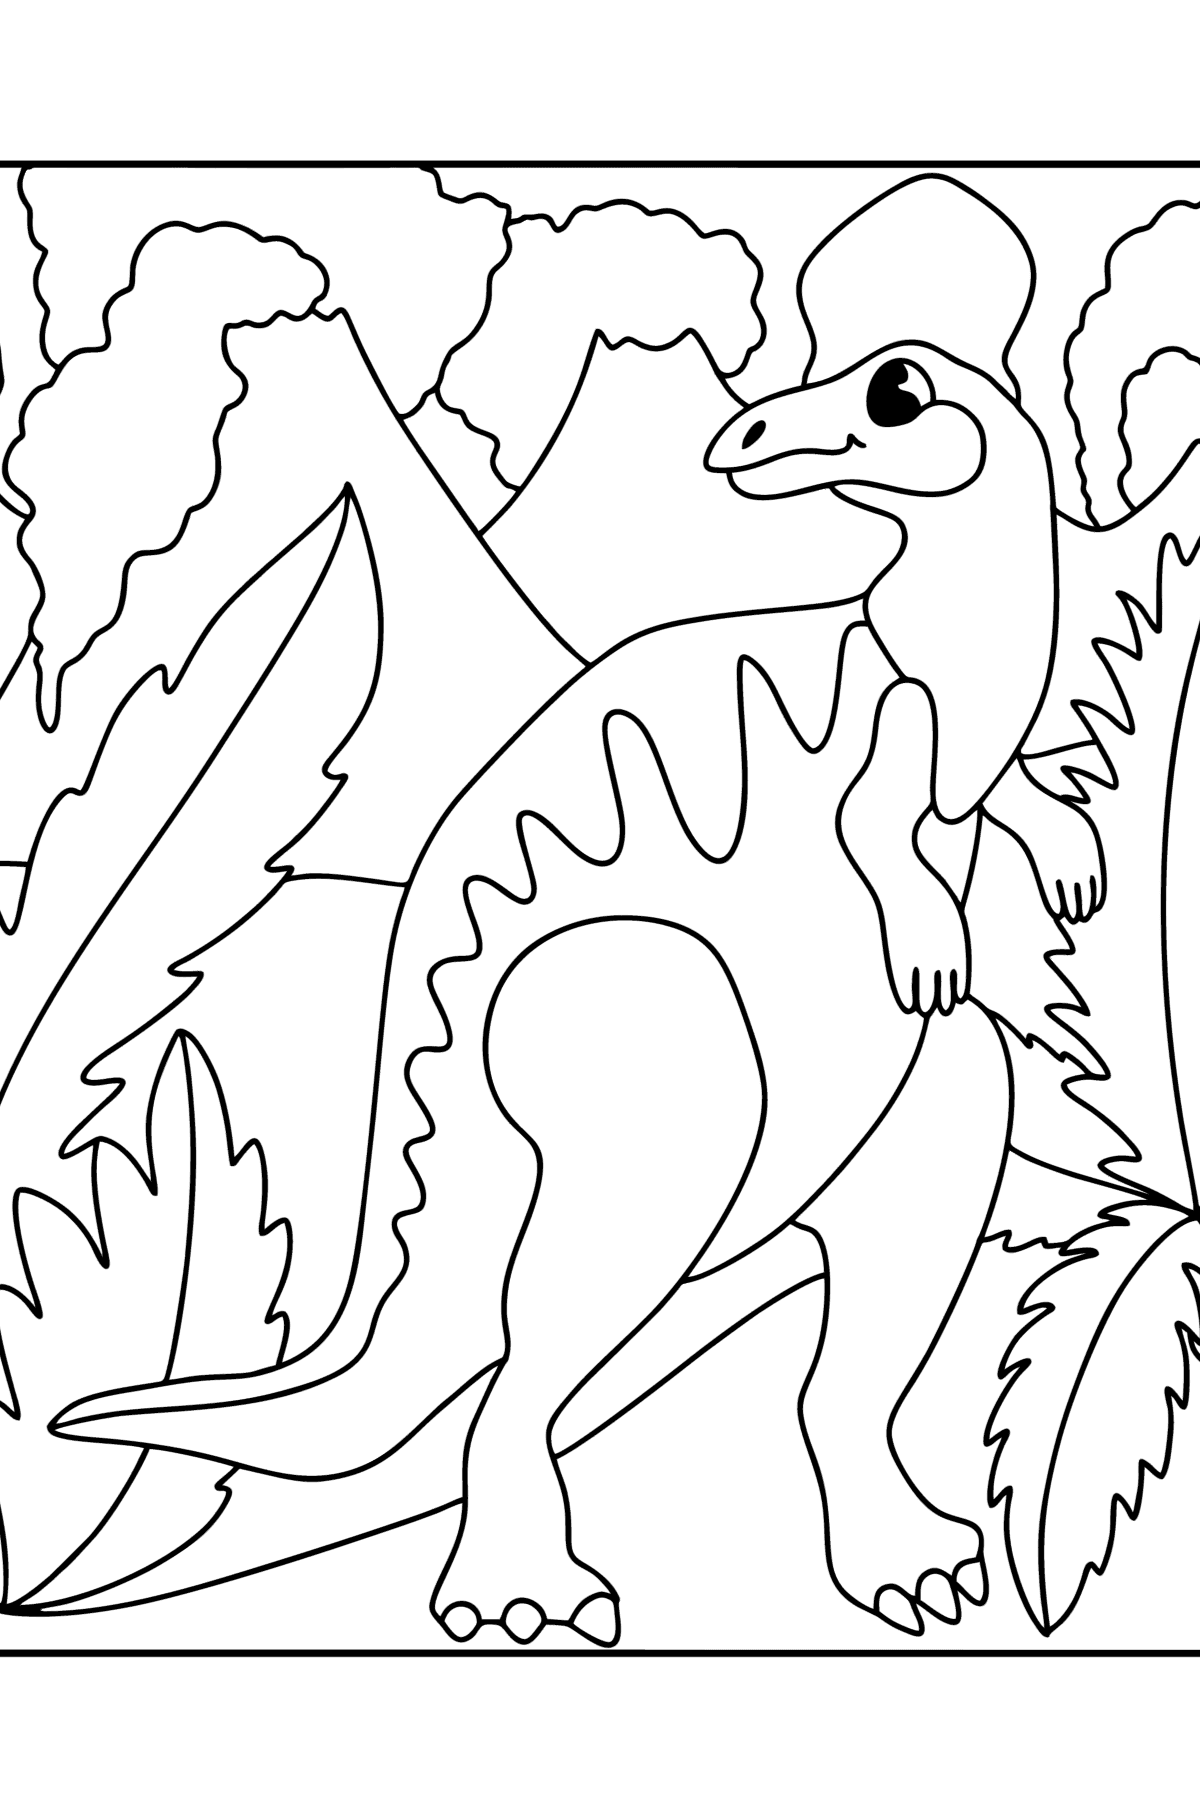 Hadrosaur coloring page - Coloring Pages for Kids